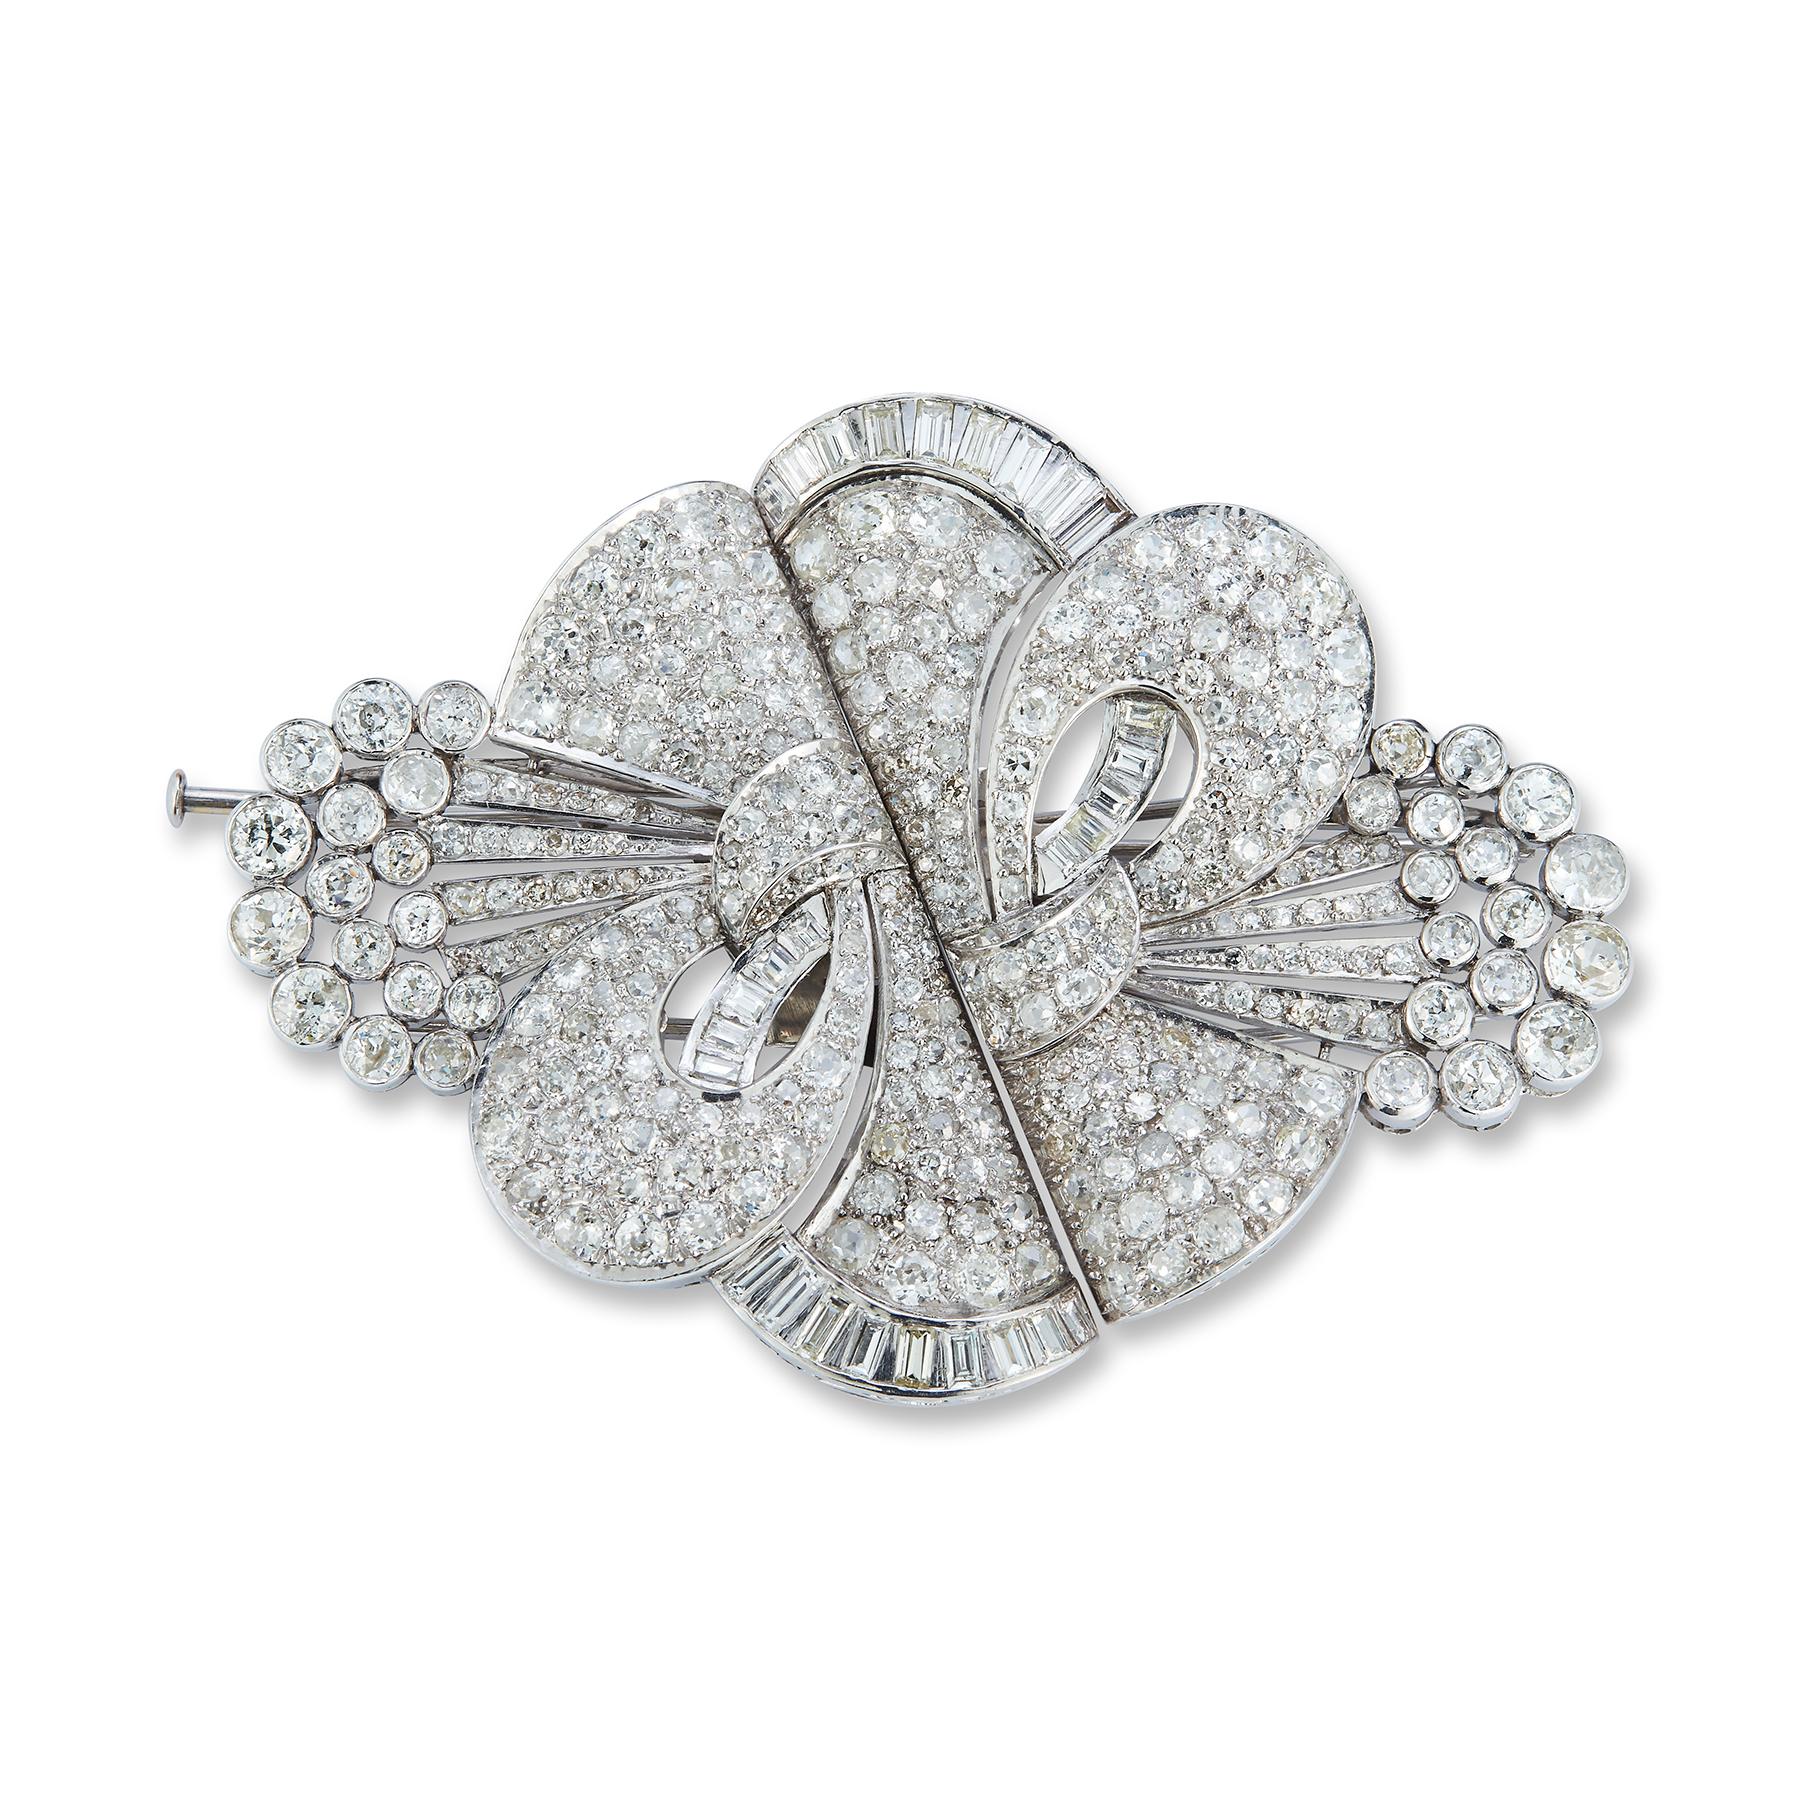 Important Large Size Art Deco Diamond Brooch

Total diamond weight approx 25.54 ct 

Brooch detaches into two clip 

Approx 3.25 inches long!
2.50 inches at it's widest

Made Circa 1930